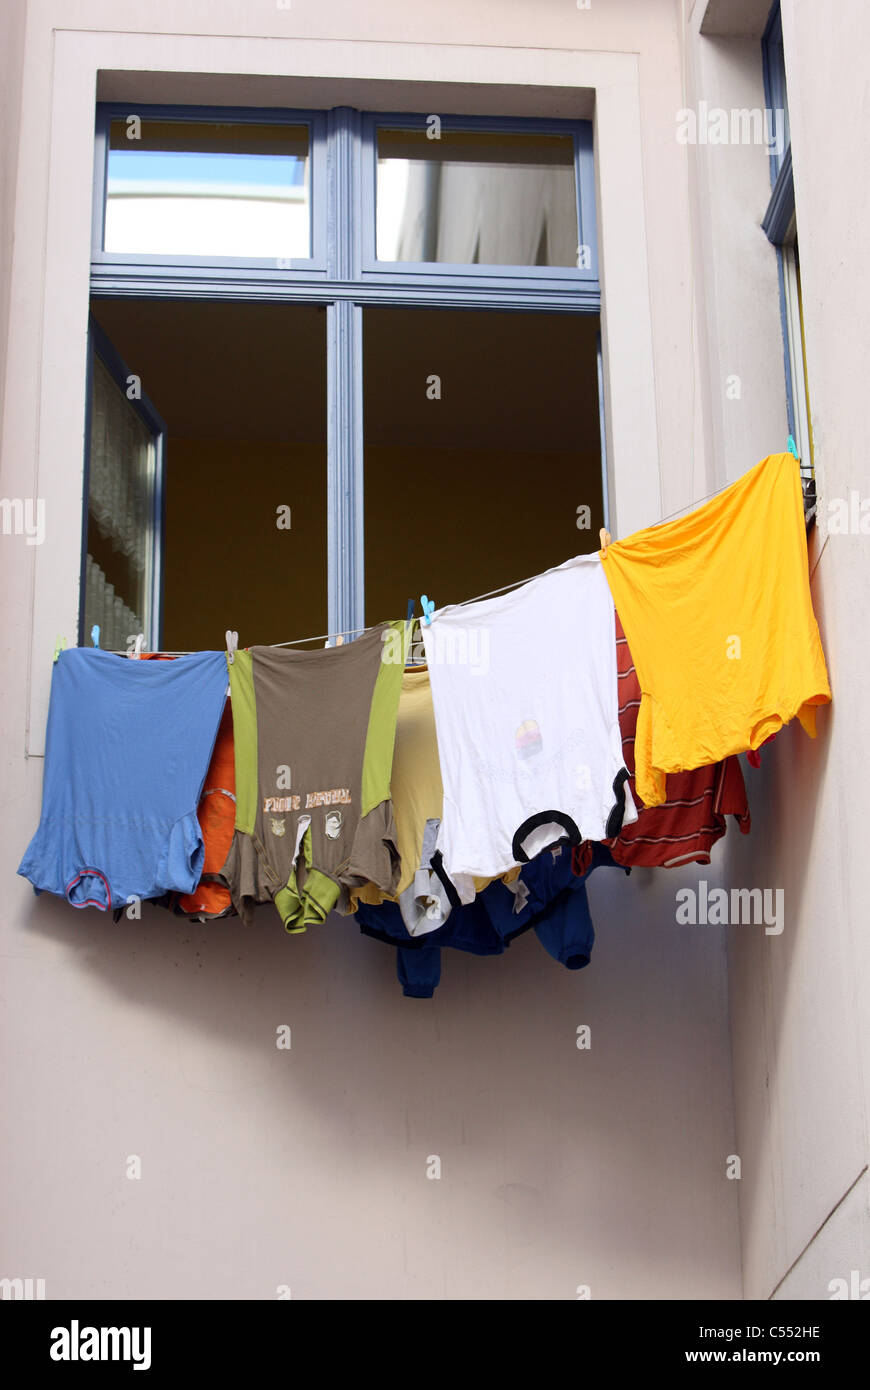 Laundry hung out to dry in front of a window Stock Photo